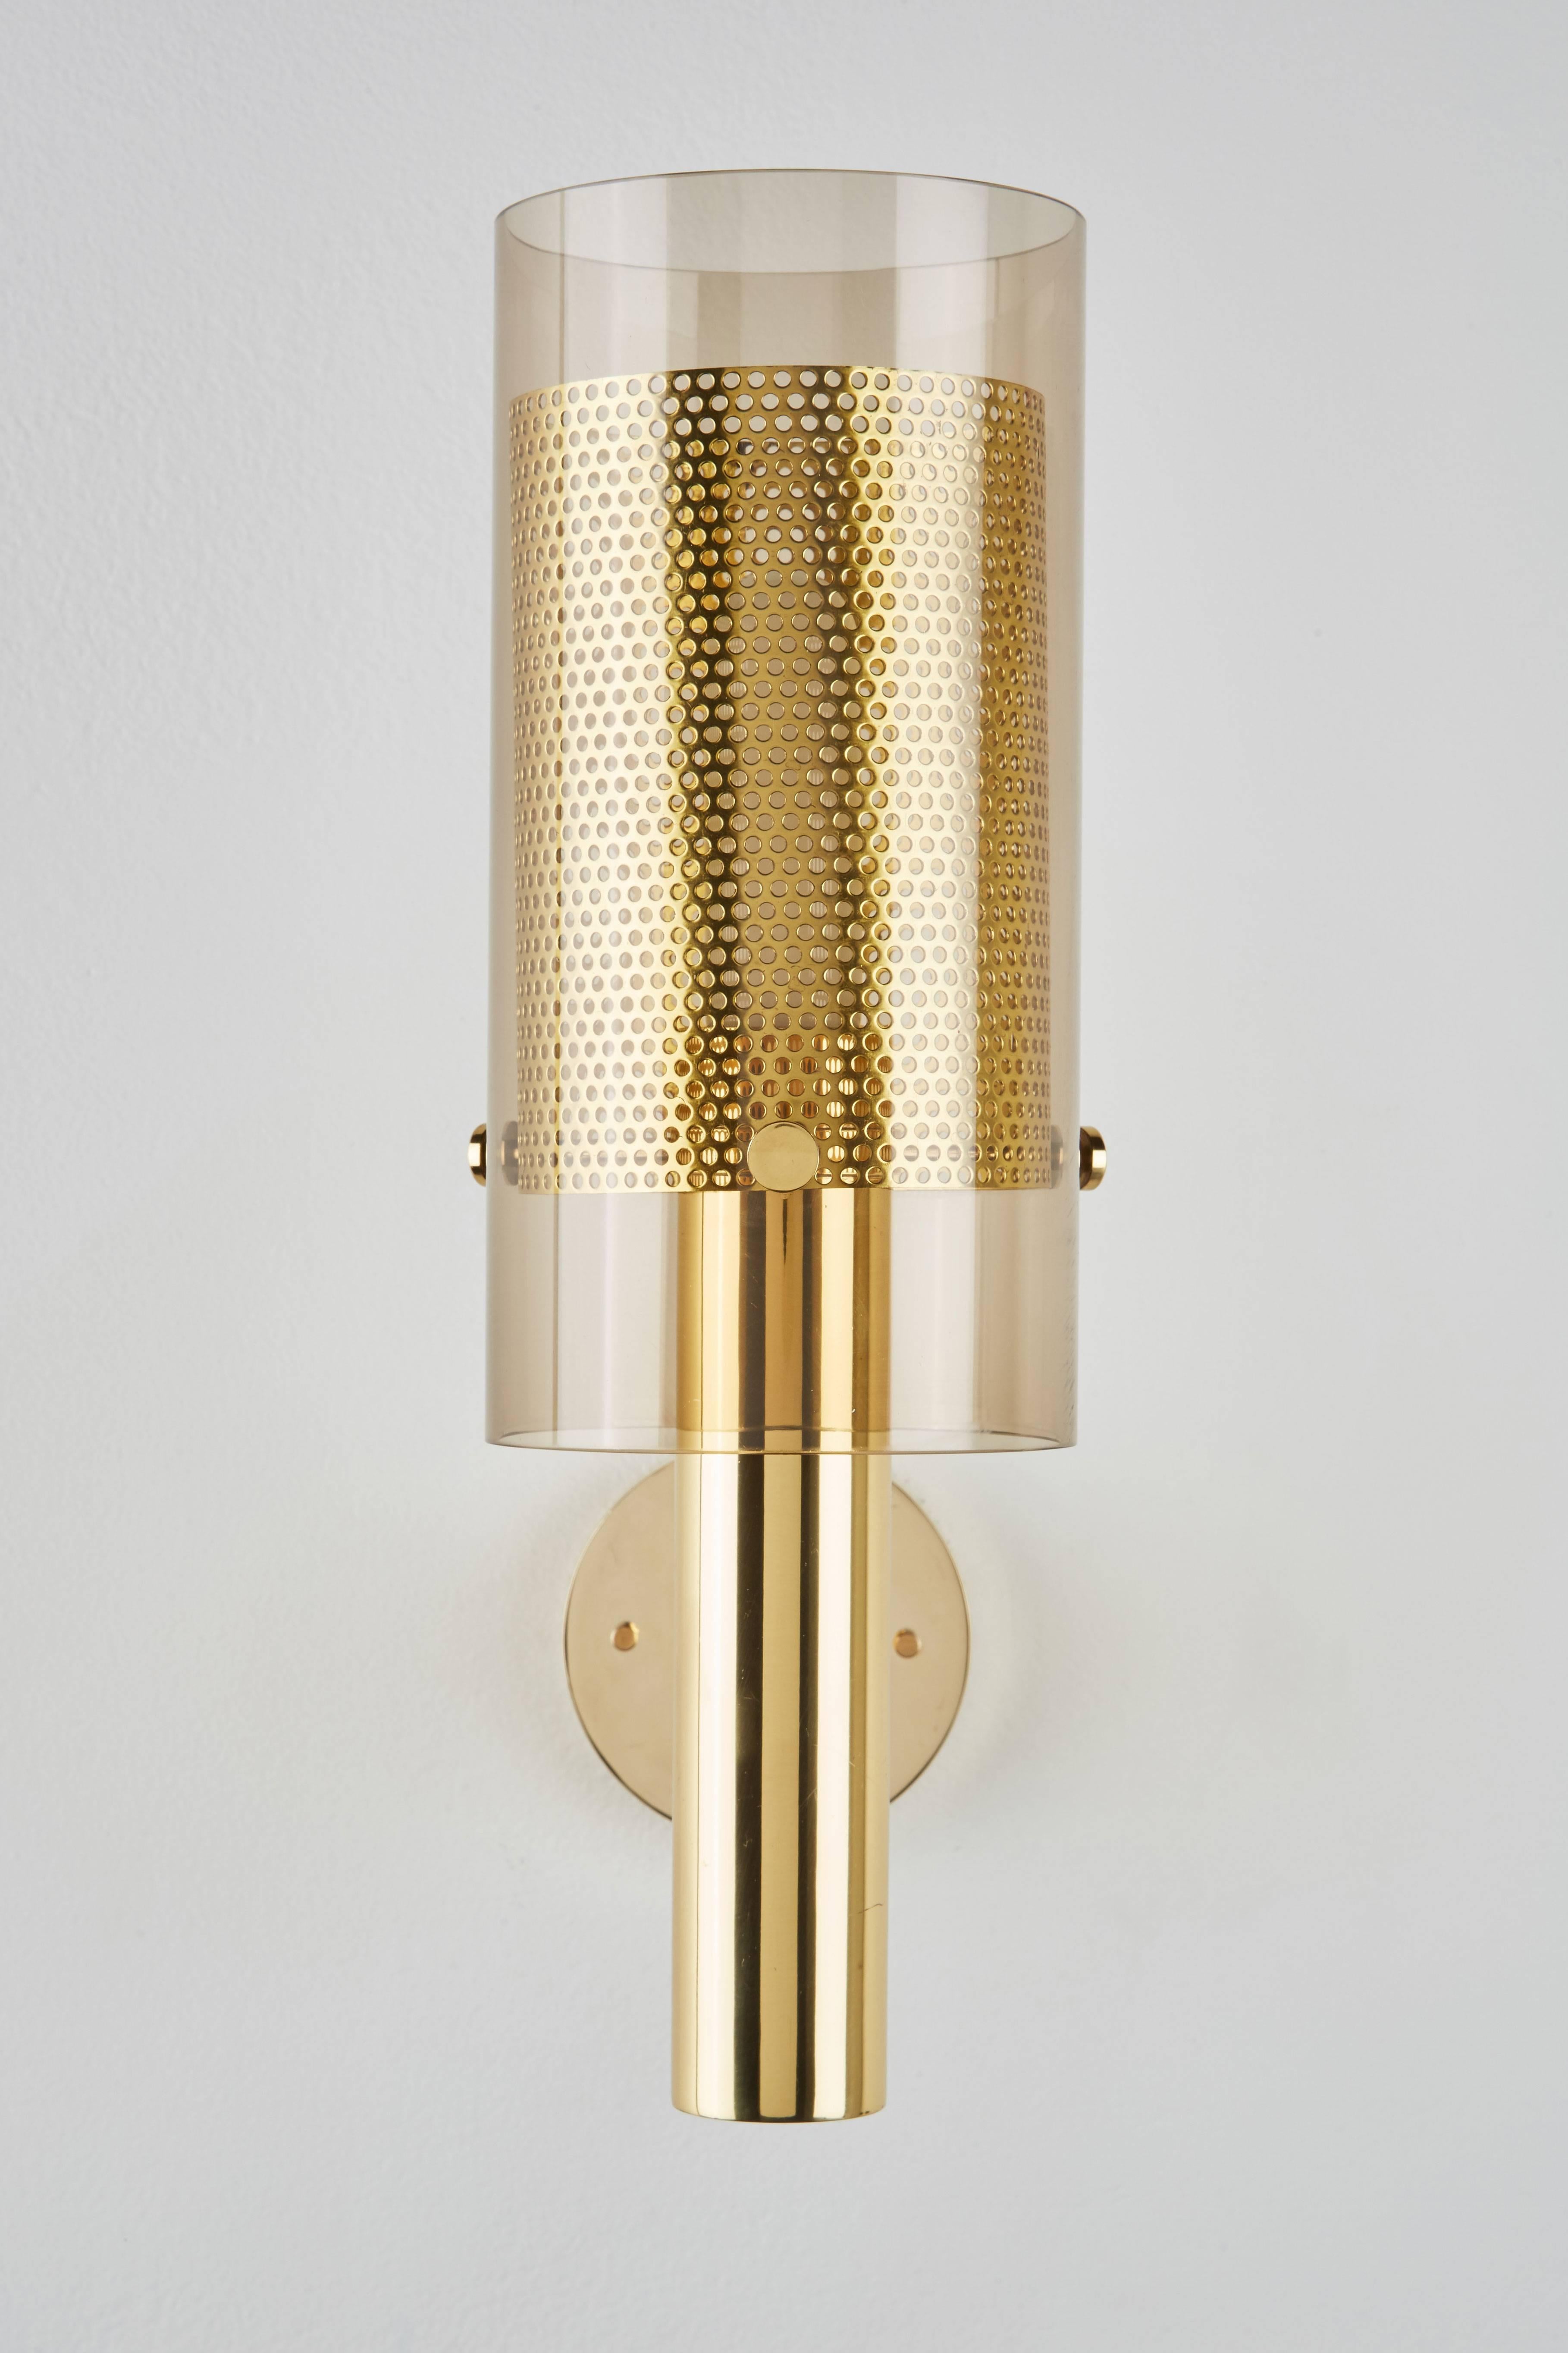 Two Pairs of Brass Perforated Sconces by Hans Agne Jakobsson, Markaryd 1